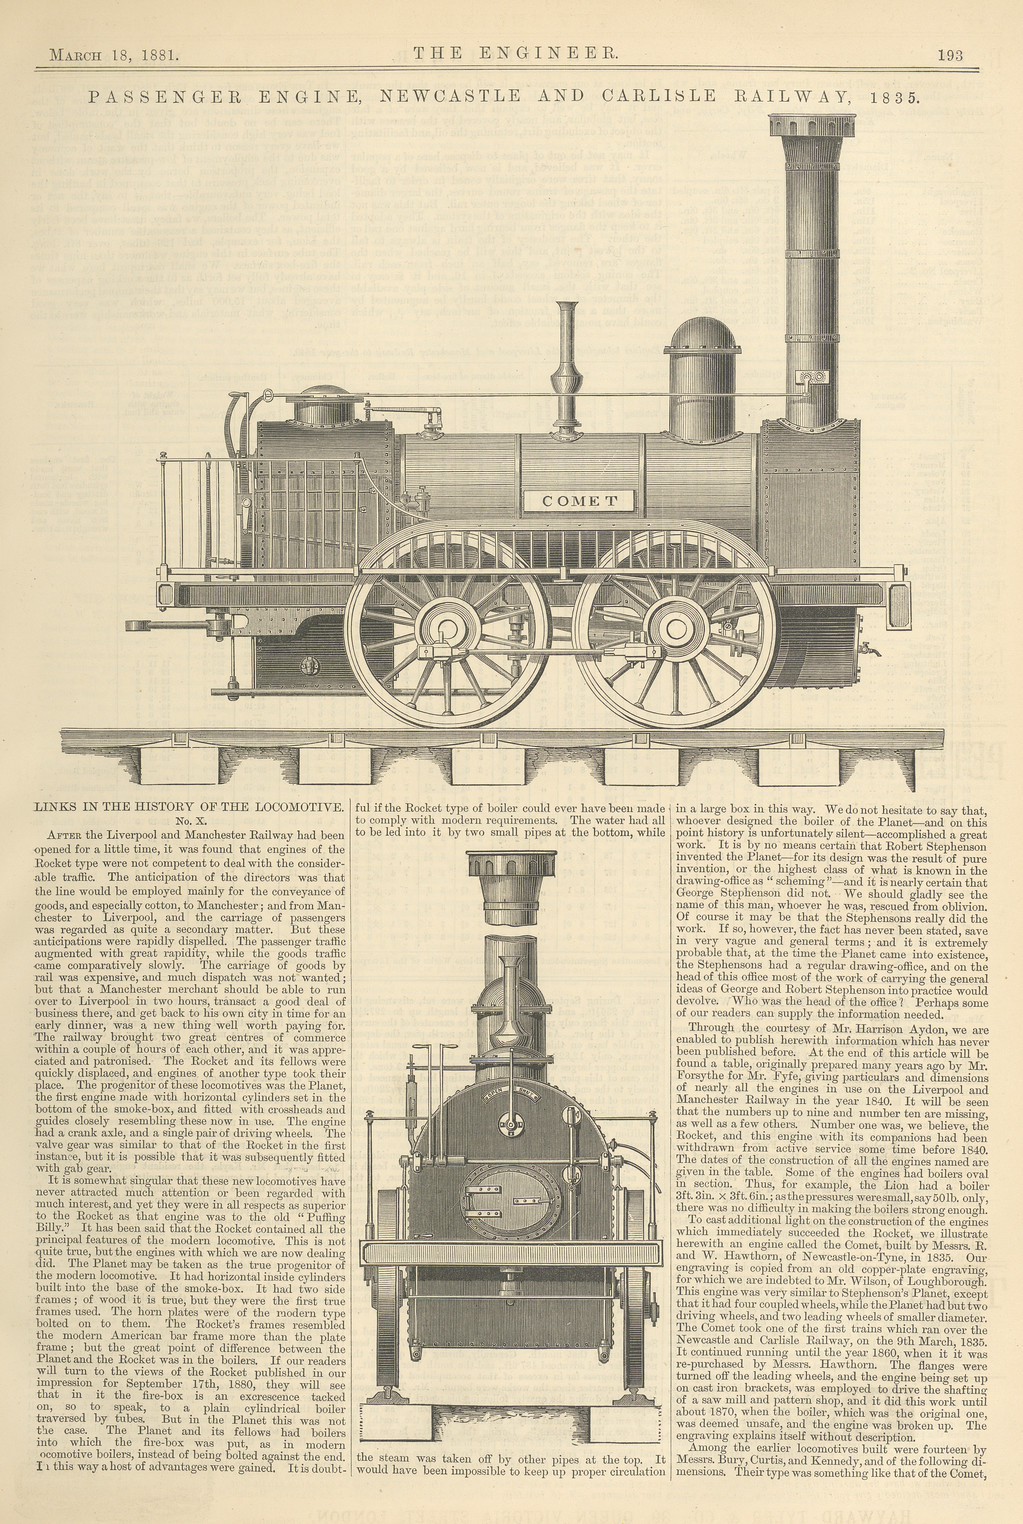 The Engineer, Vol.51, 18 March